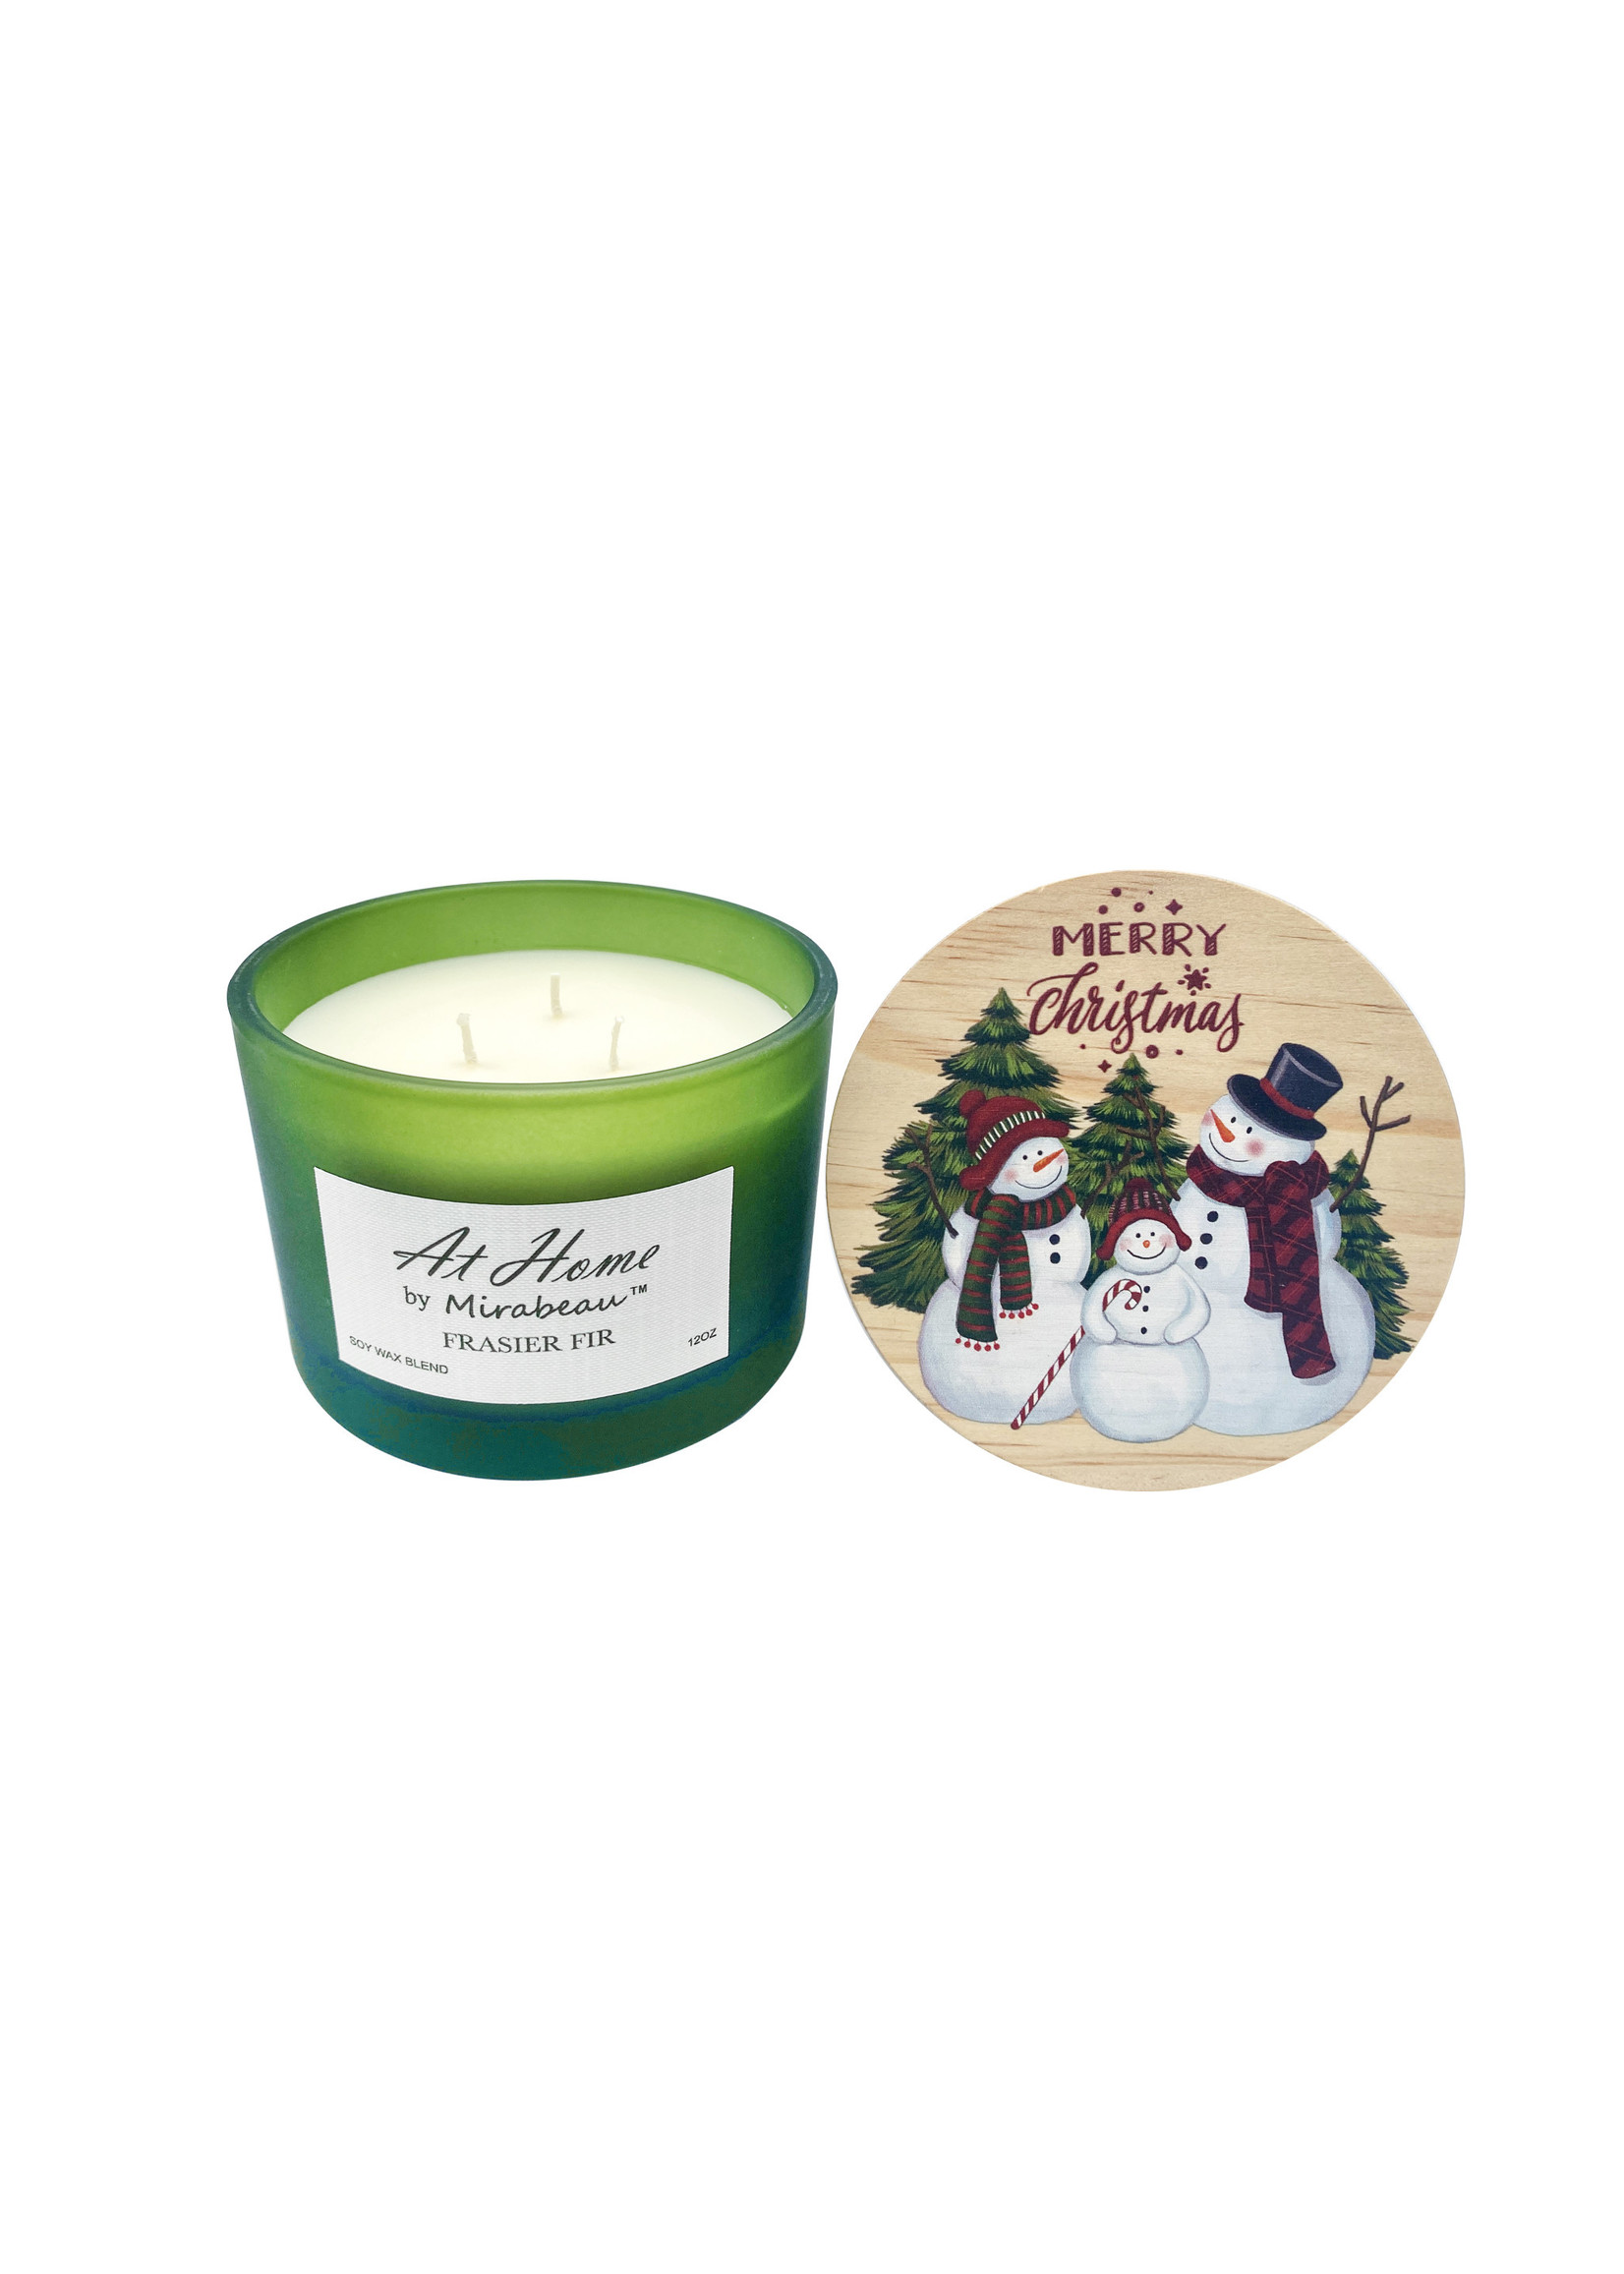 At Home by Mirabeau 12 oz Holiday Candle